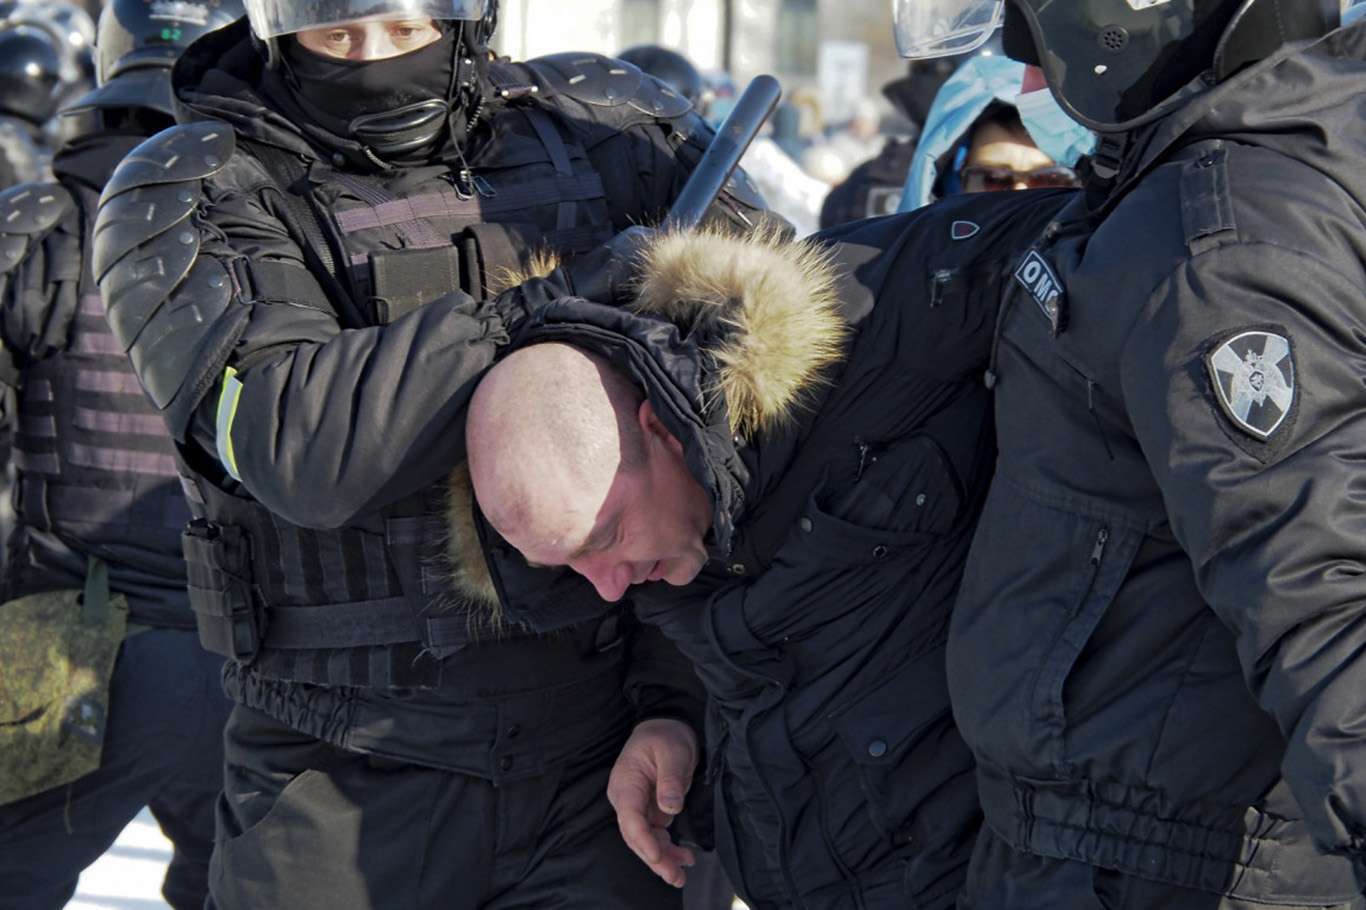 More than 5,100 protesters detained in Russia